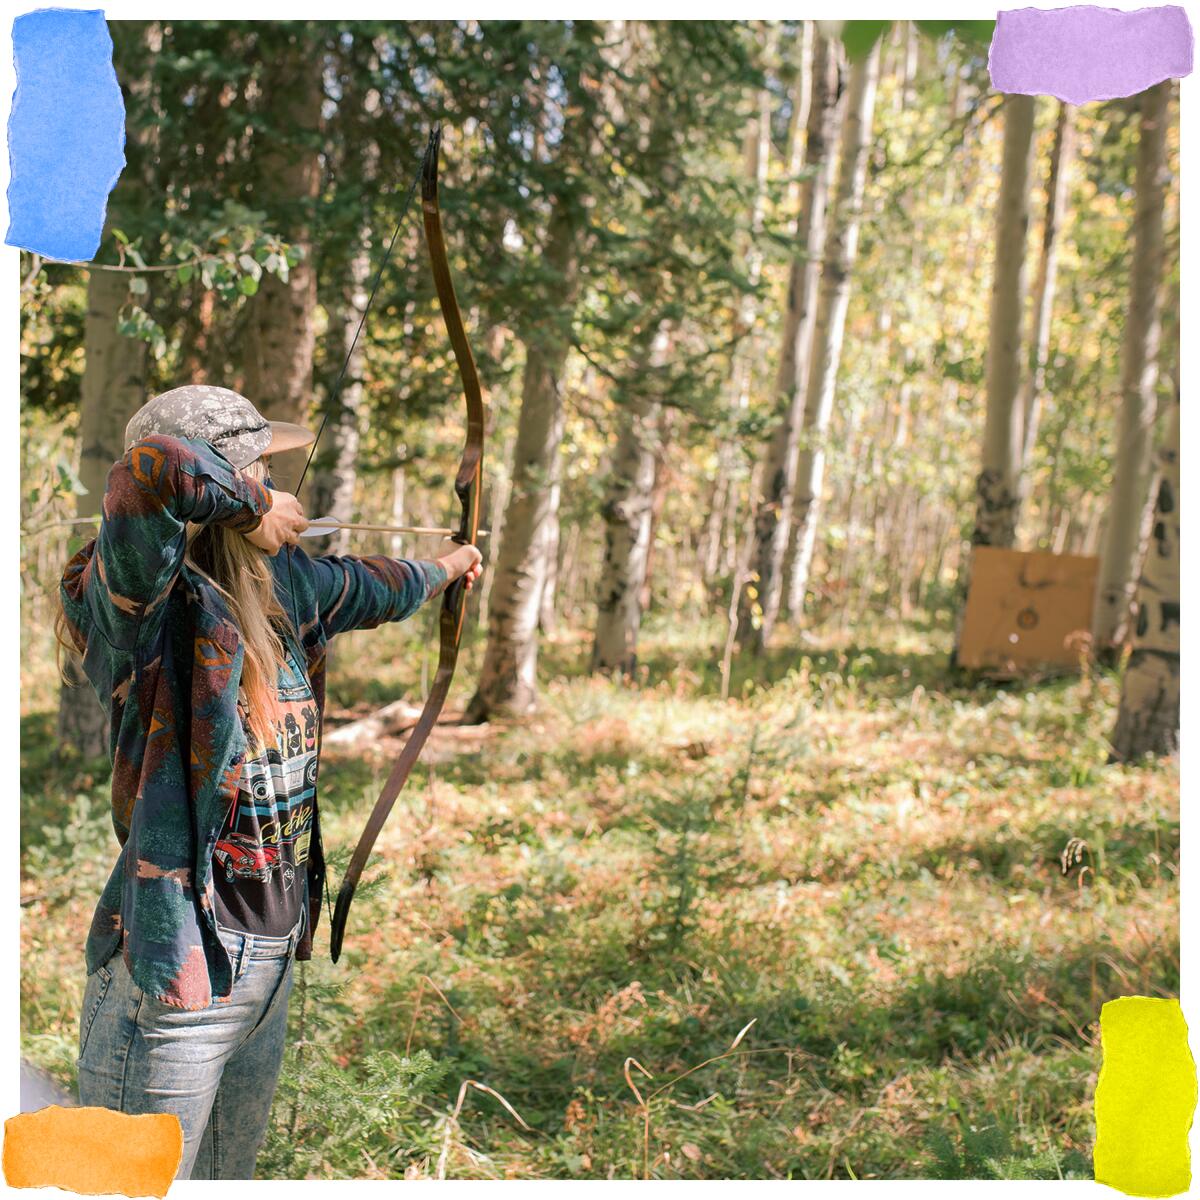 A person with long hair aims a wooden bow at a target in the woods.